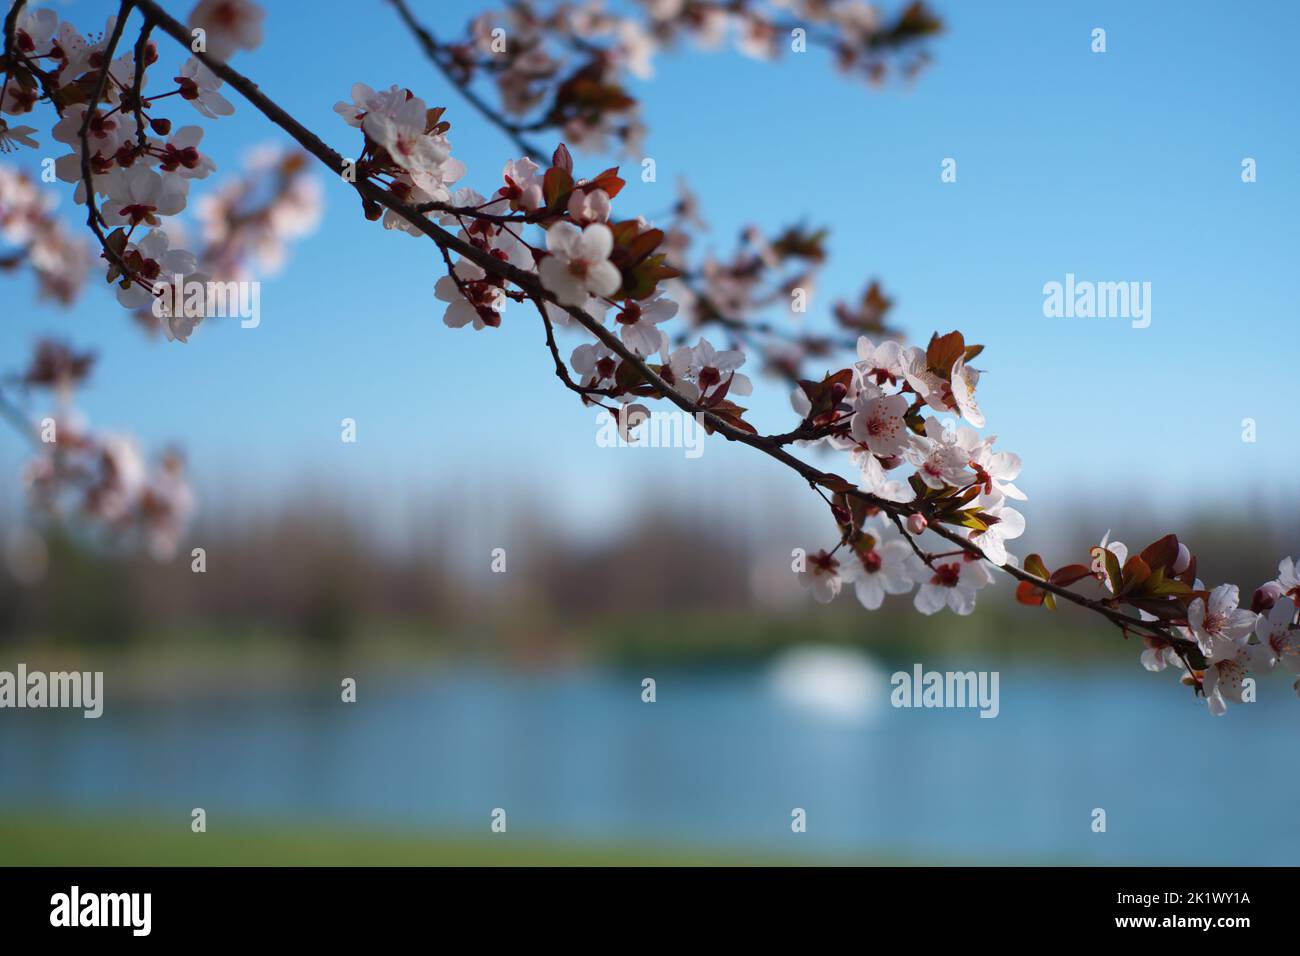 Flowers blossoming on tree branches in spring bookeh Stock Photo